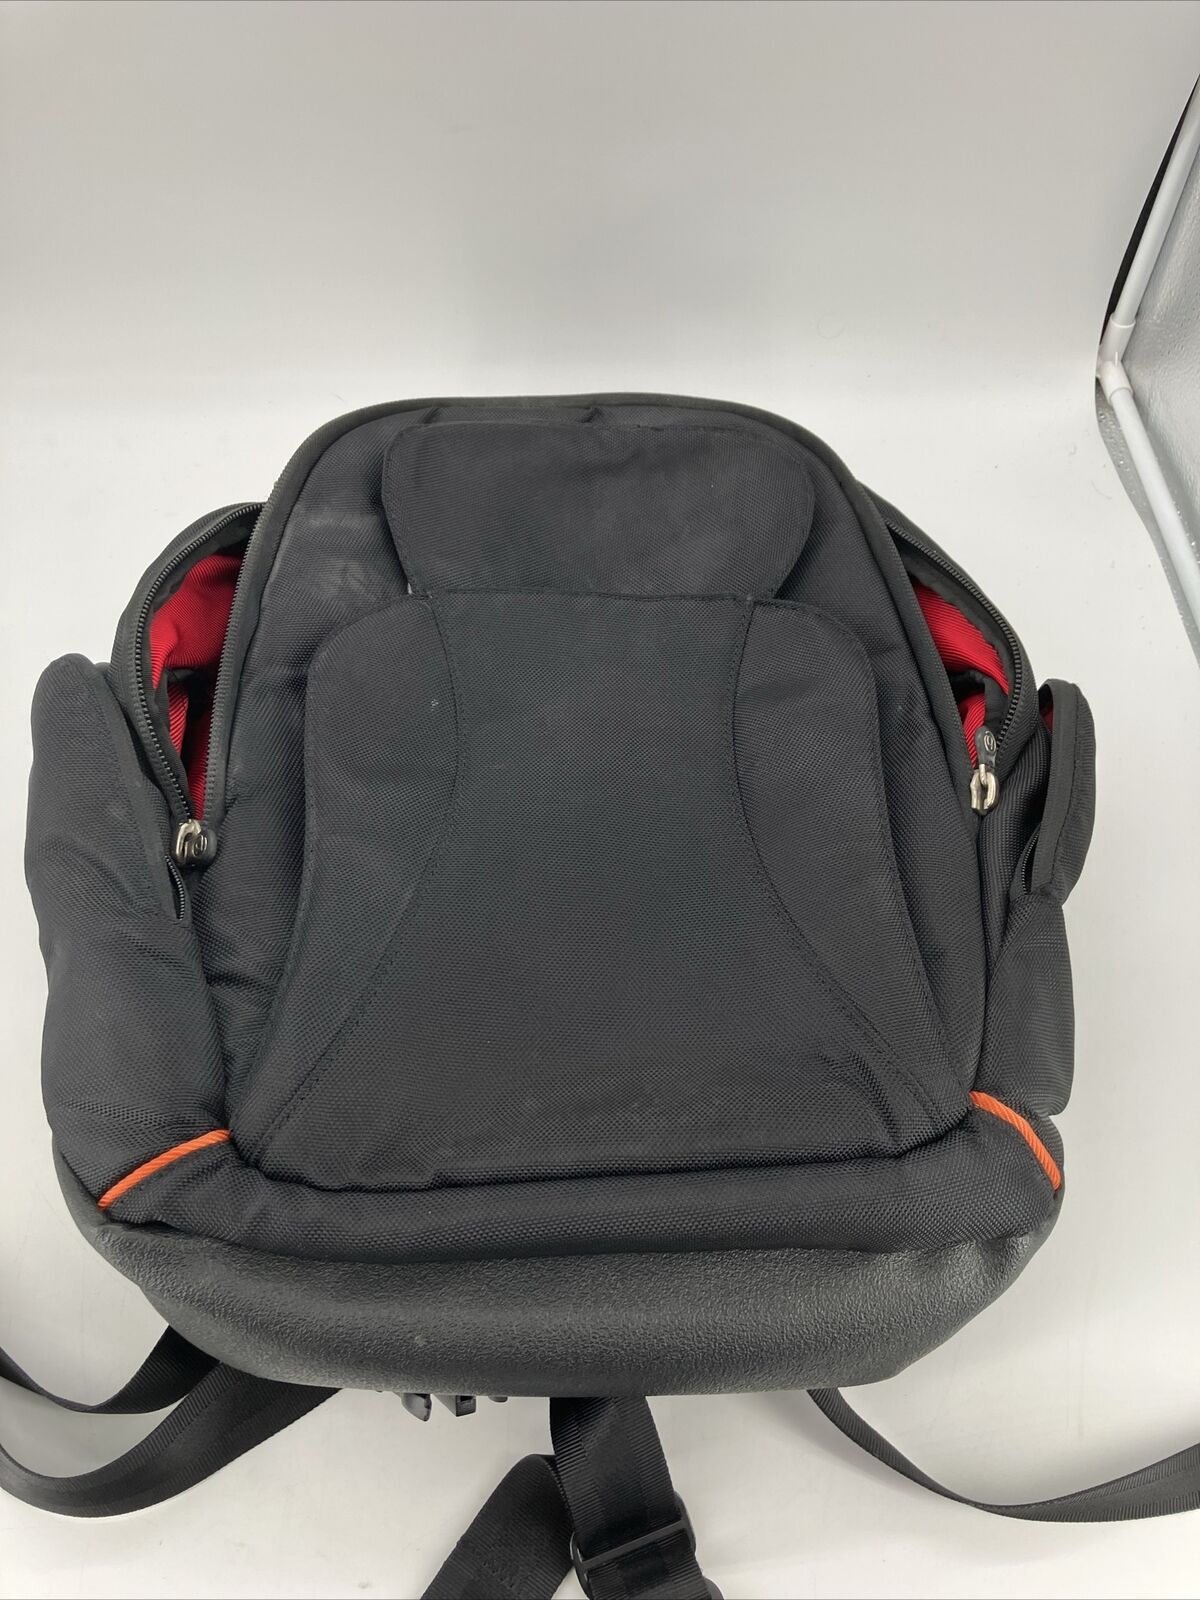 Booq Boa 3 Laptop Computer Backpack Good Used Condition Black and Red